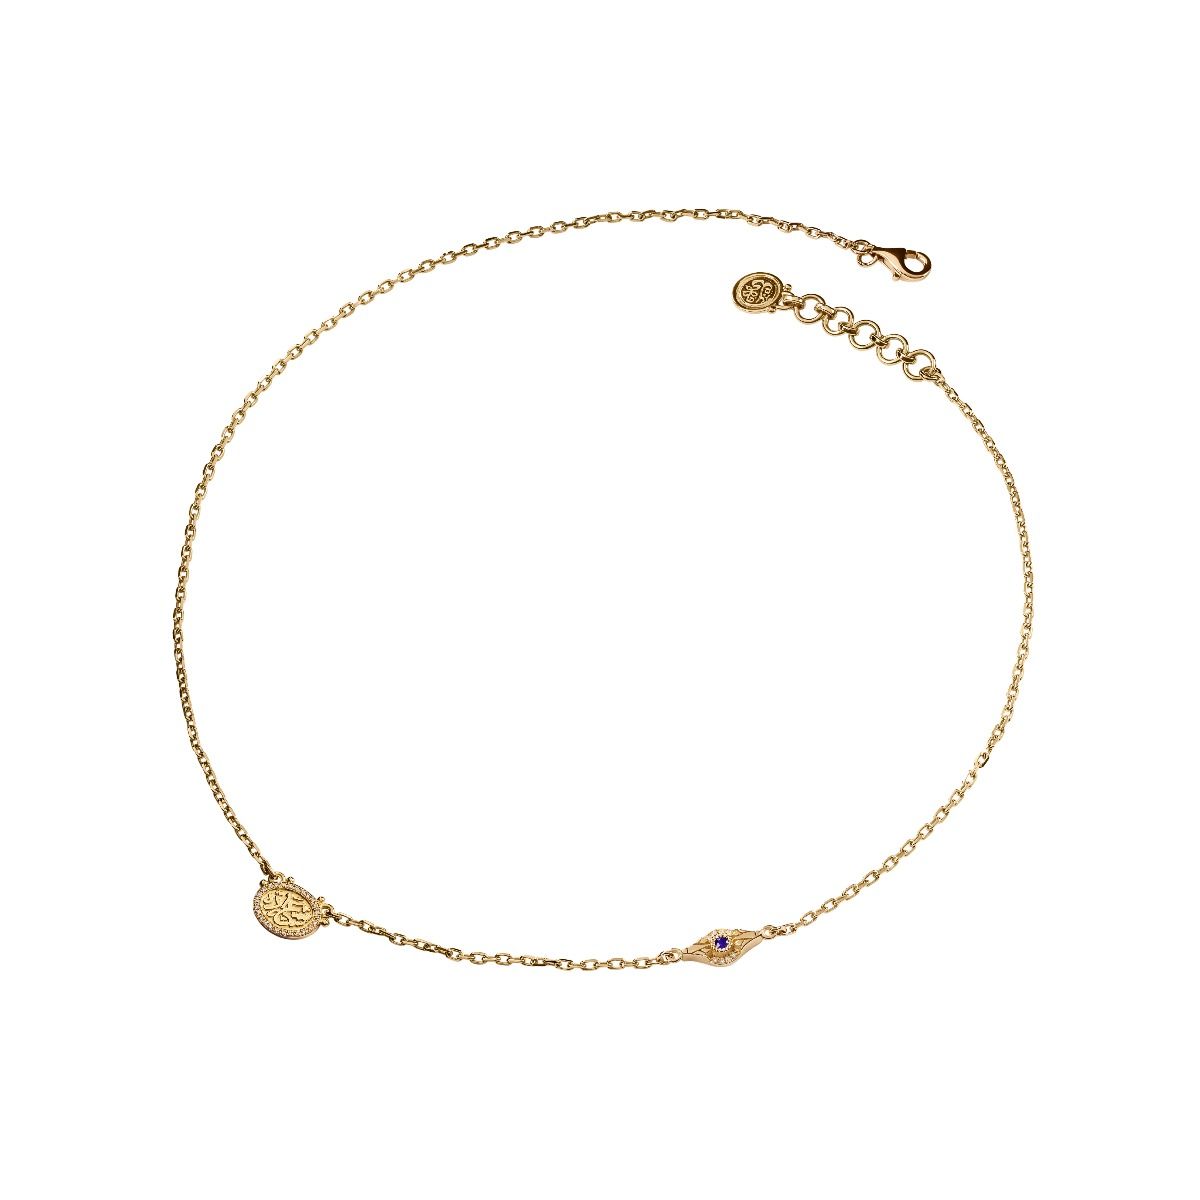 Gold Happiness Necklace by Azza Fahmy - Designer Necklaces